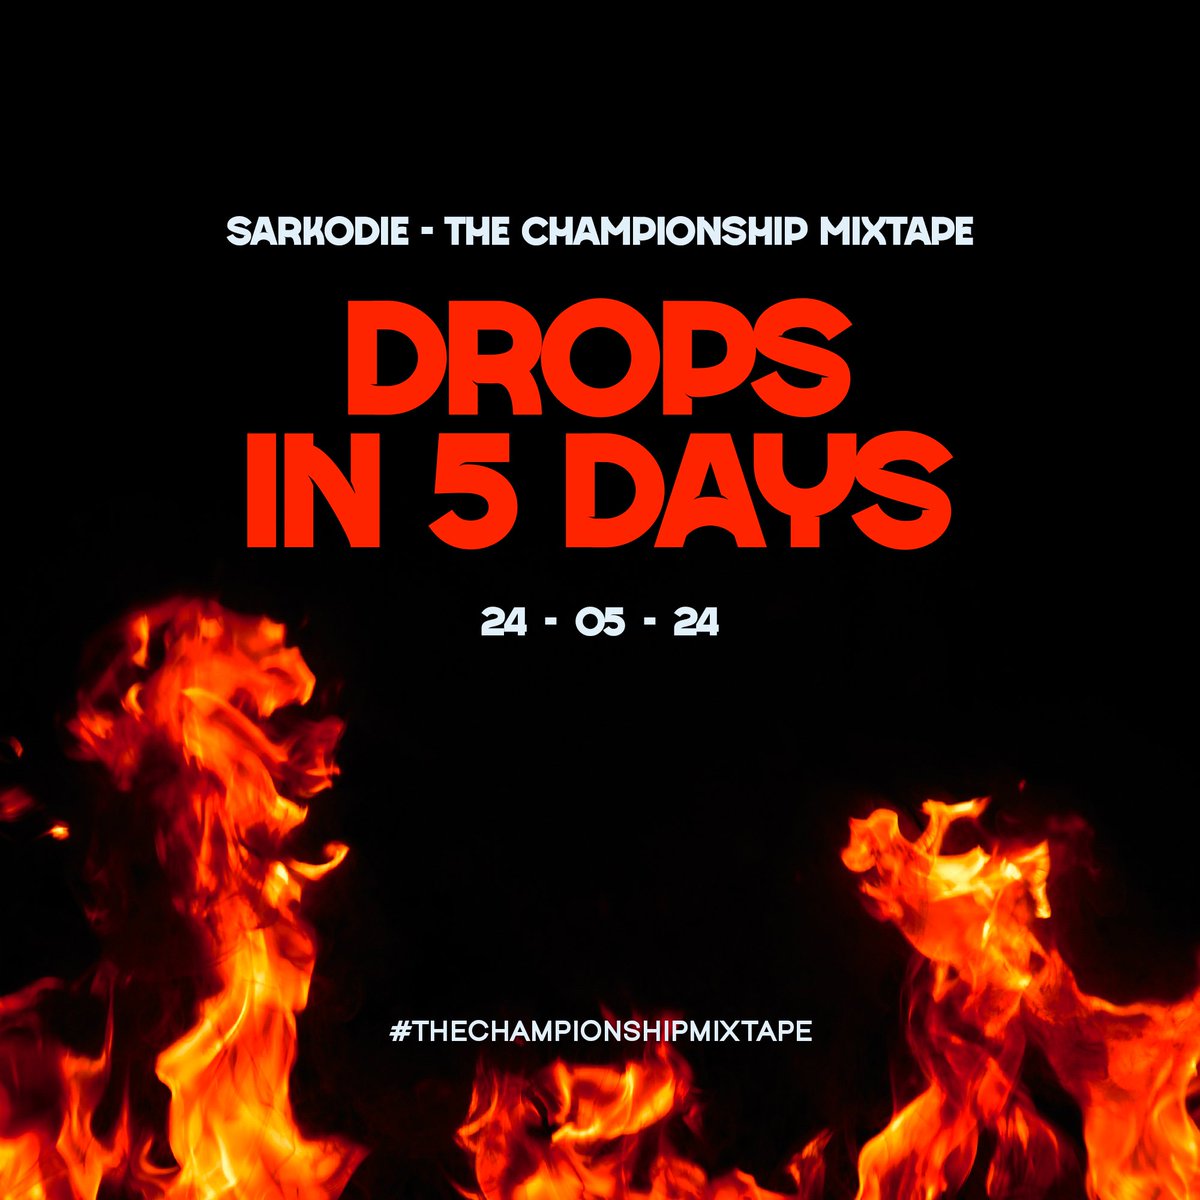 THE WAIT IS ALMOST OVER! #TheChampionshipMixtape drops in just 5 DAYS!